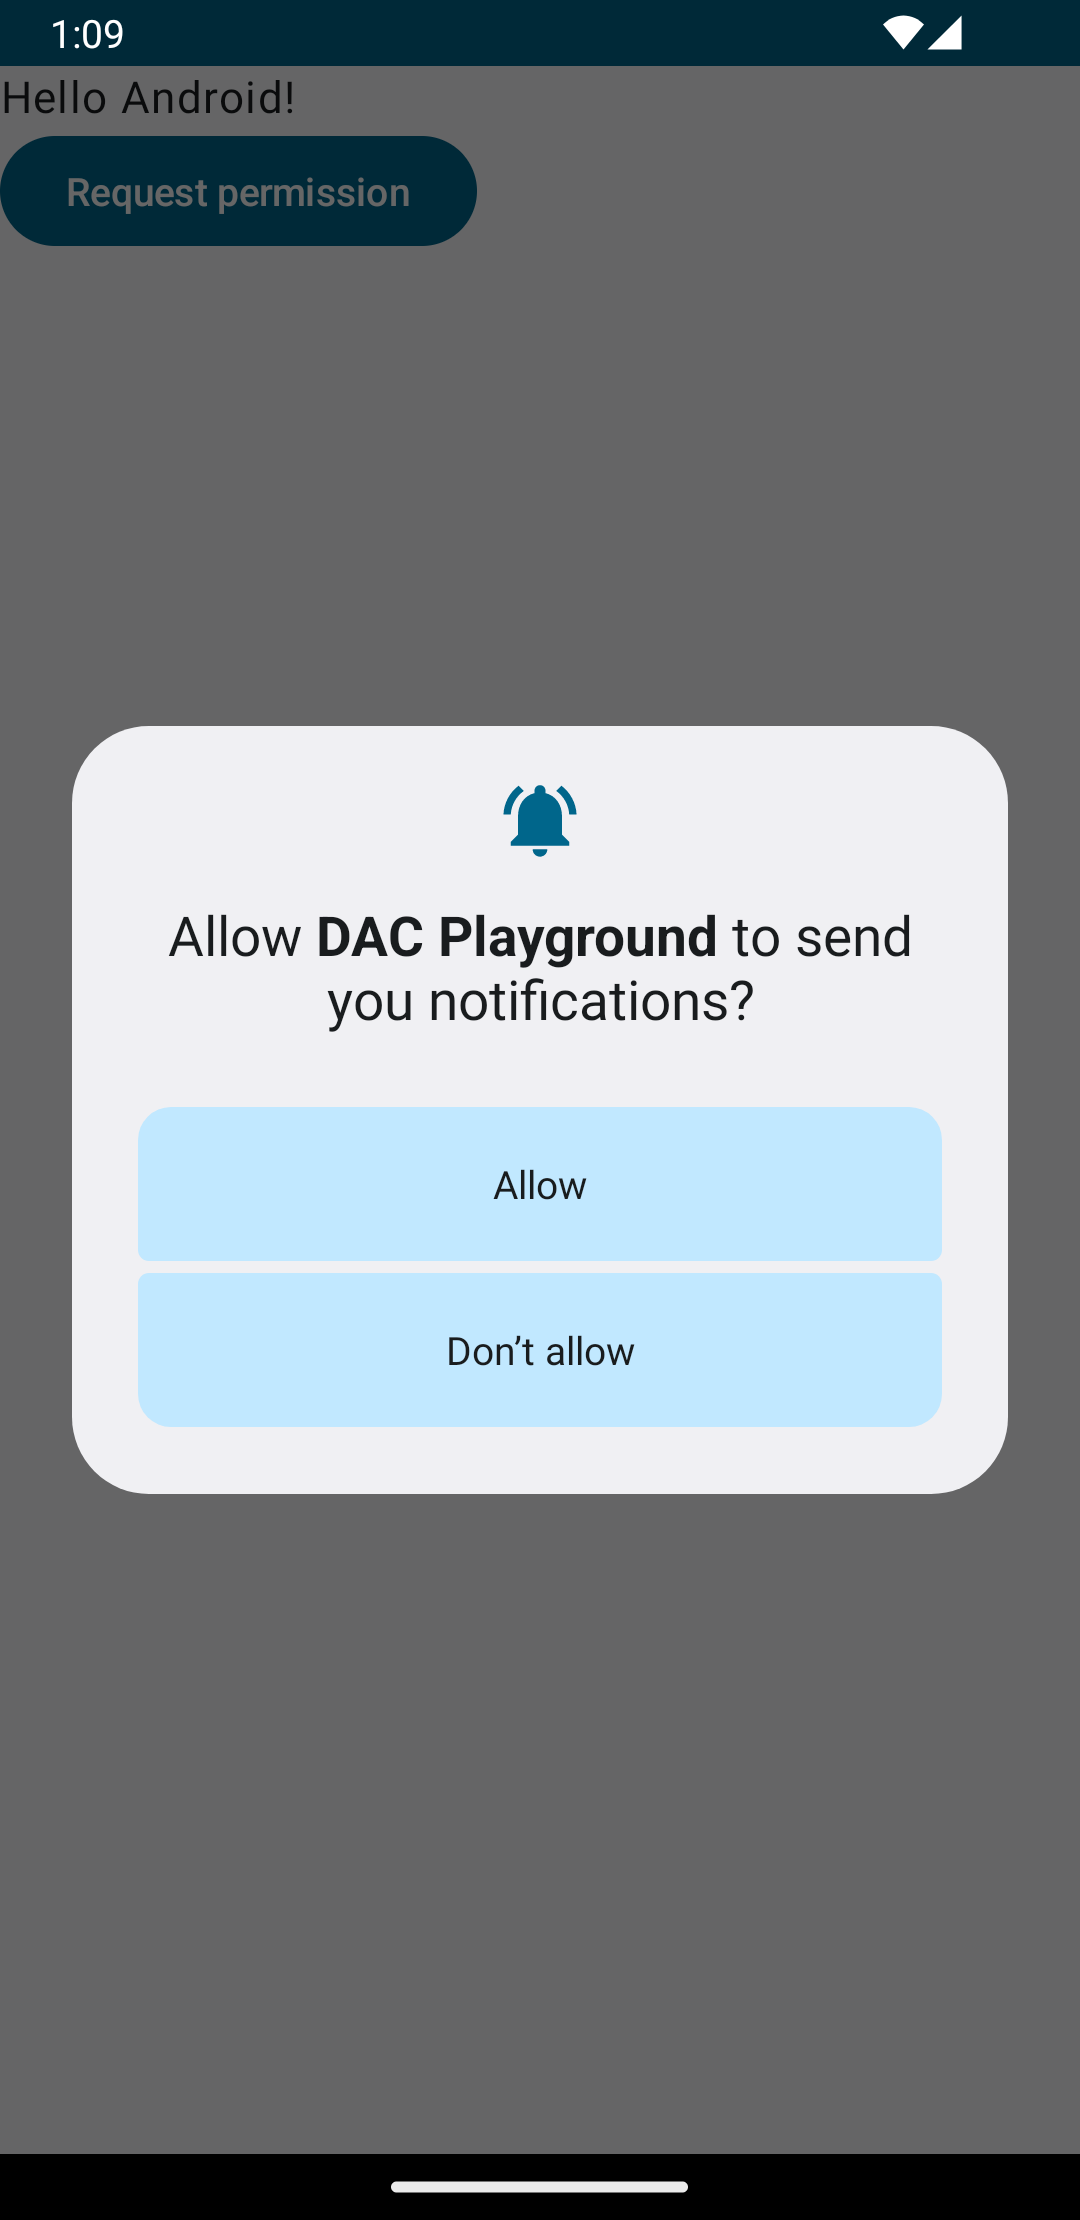 An image showing the permission request dialog